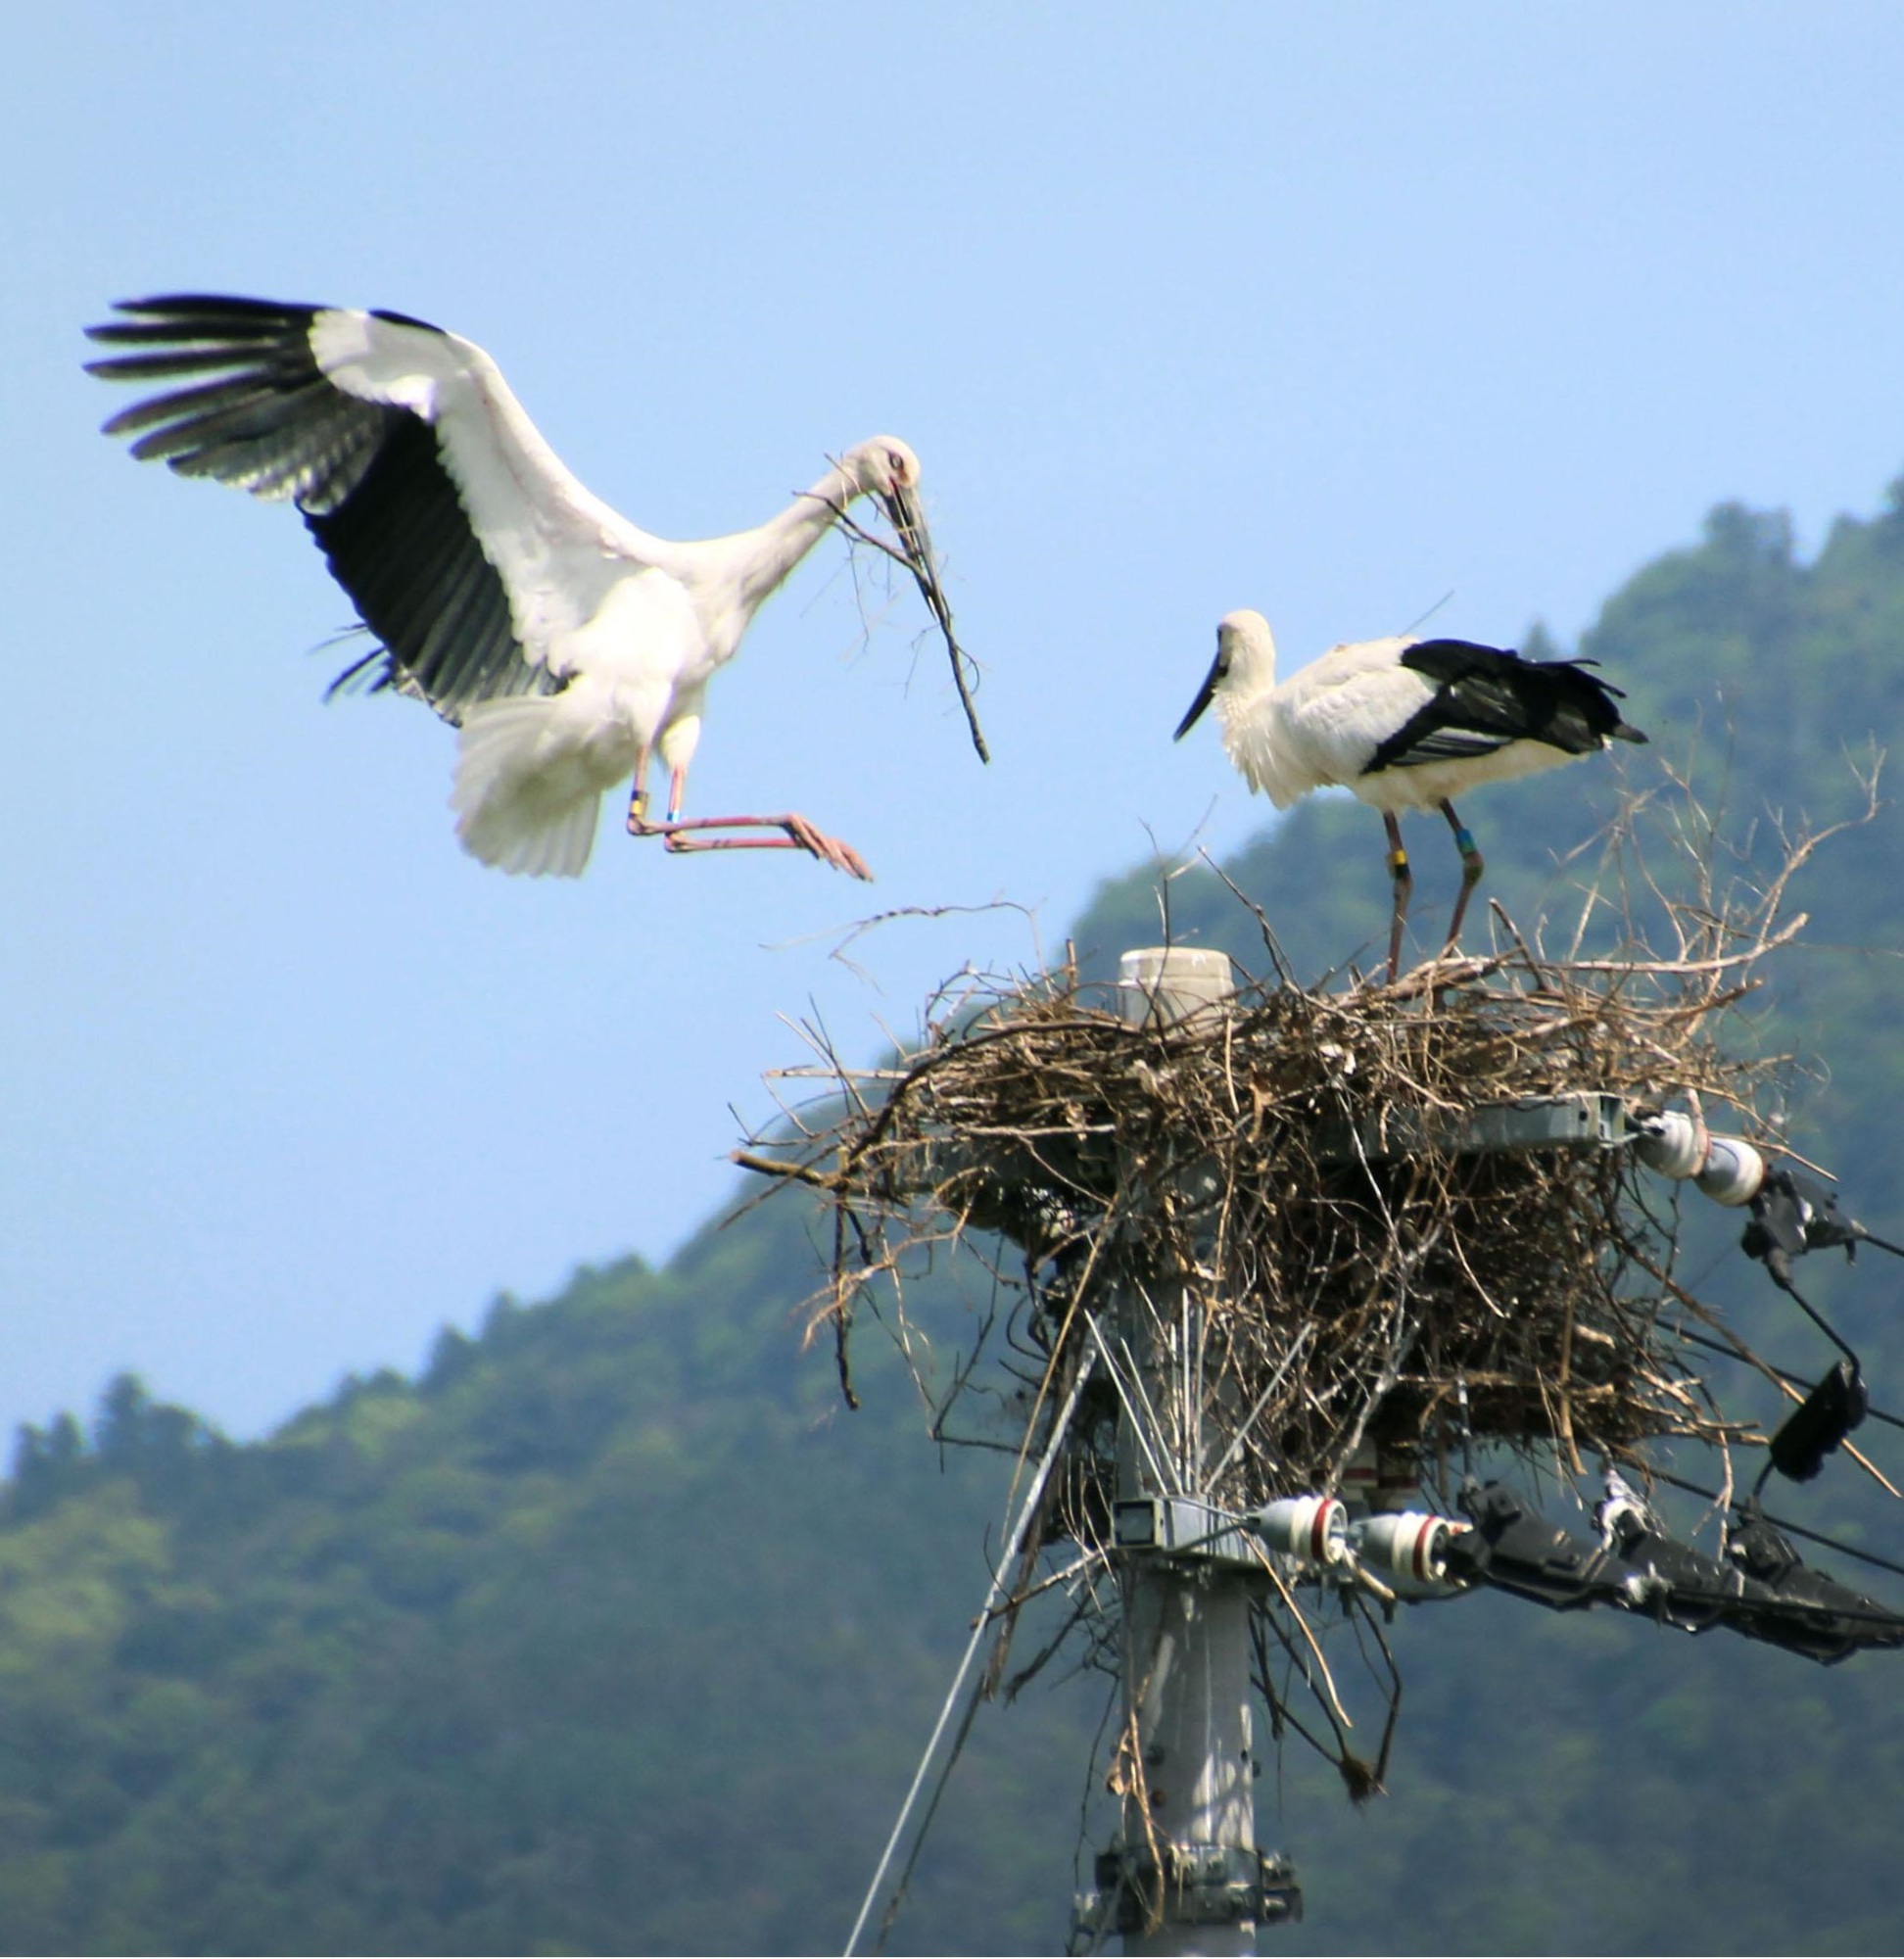 Rare white stork likely hatched in wild, conservation group says ...